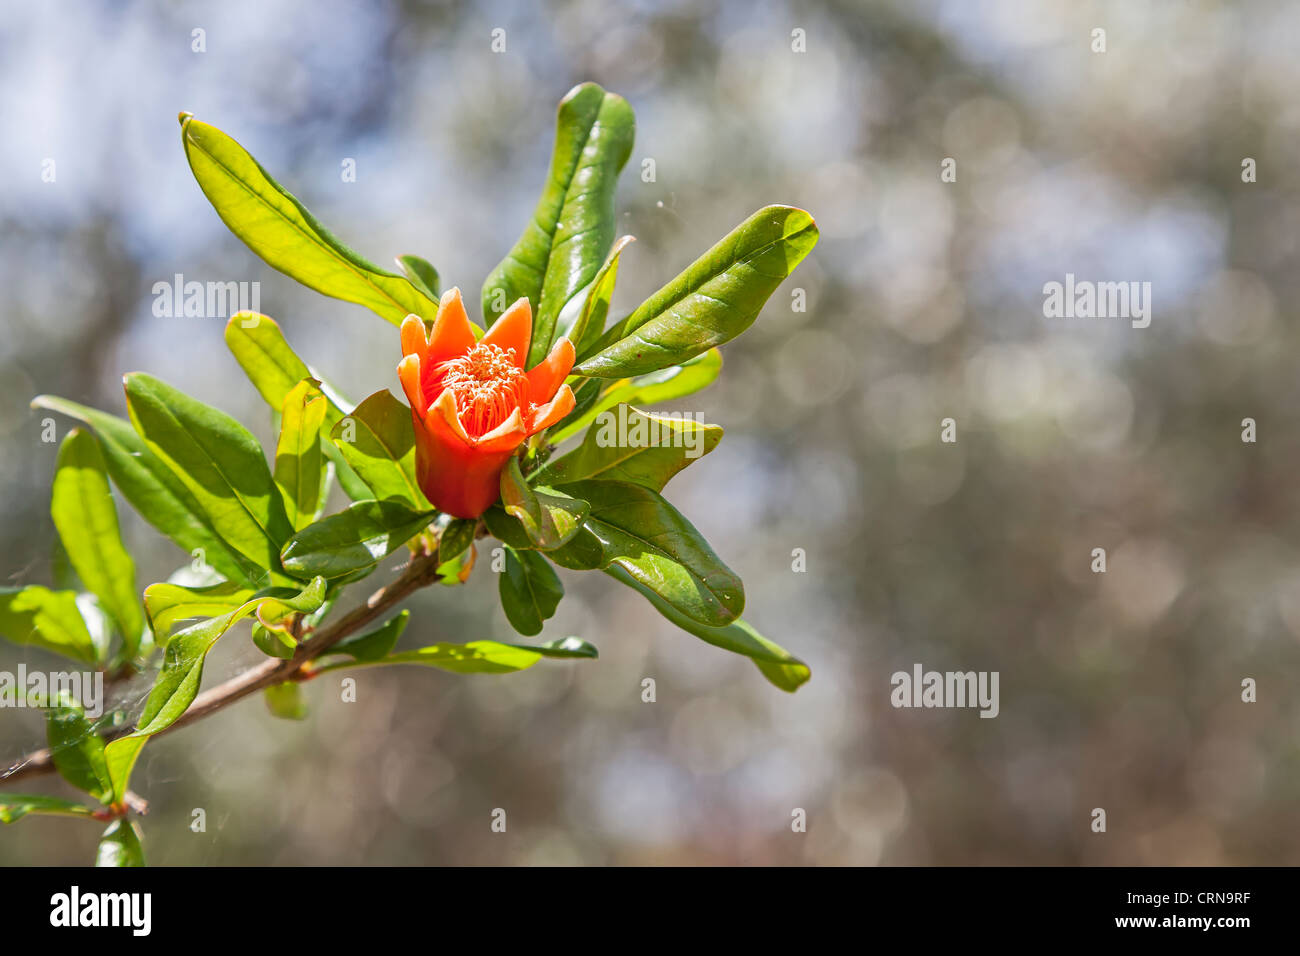 Flower of a pomegranate turning into fruit. Punica granatum L Stock Photo